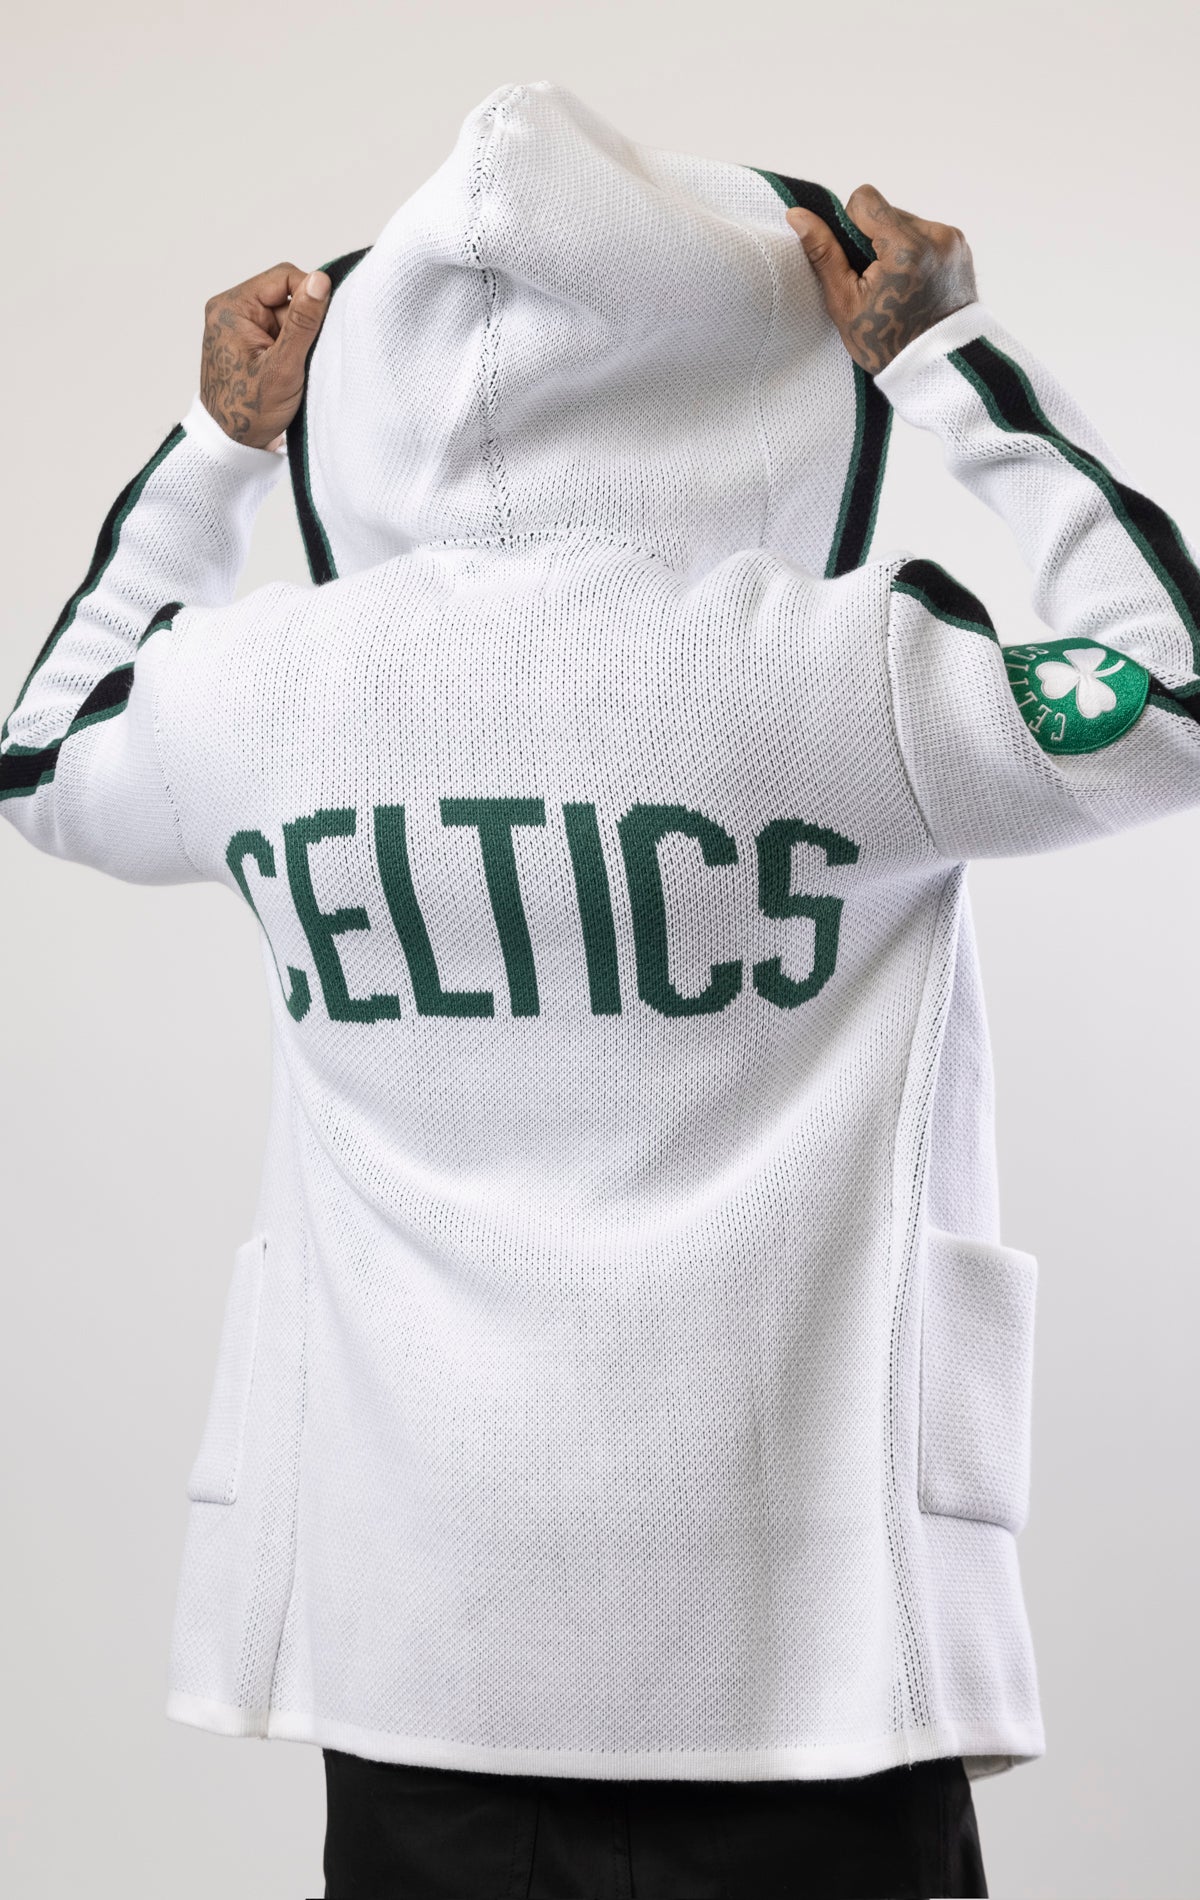 Upgrade your game day look with this Boston Celtics Cardigan Sweater. This cozy jacket is designed with a stylish three-quarter length and boasts bold team branding on the front, back, and sleeve. Complete with a full-zip closure, attached hood, and front pockets, this knit sweater offers both comfort and style.